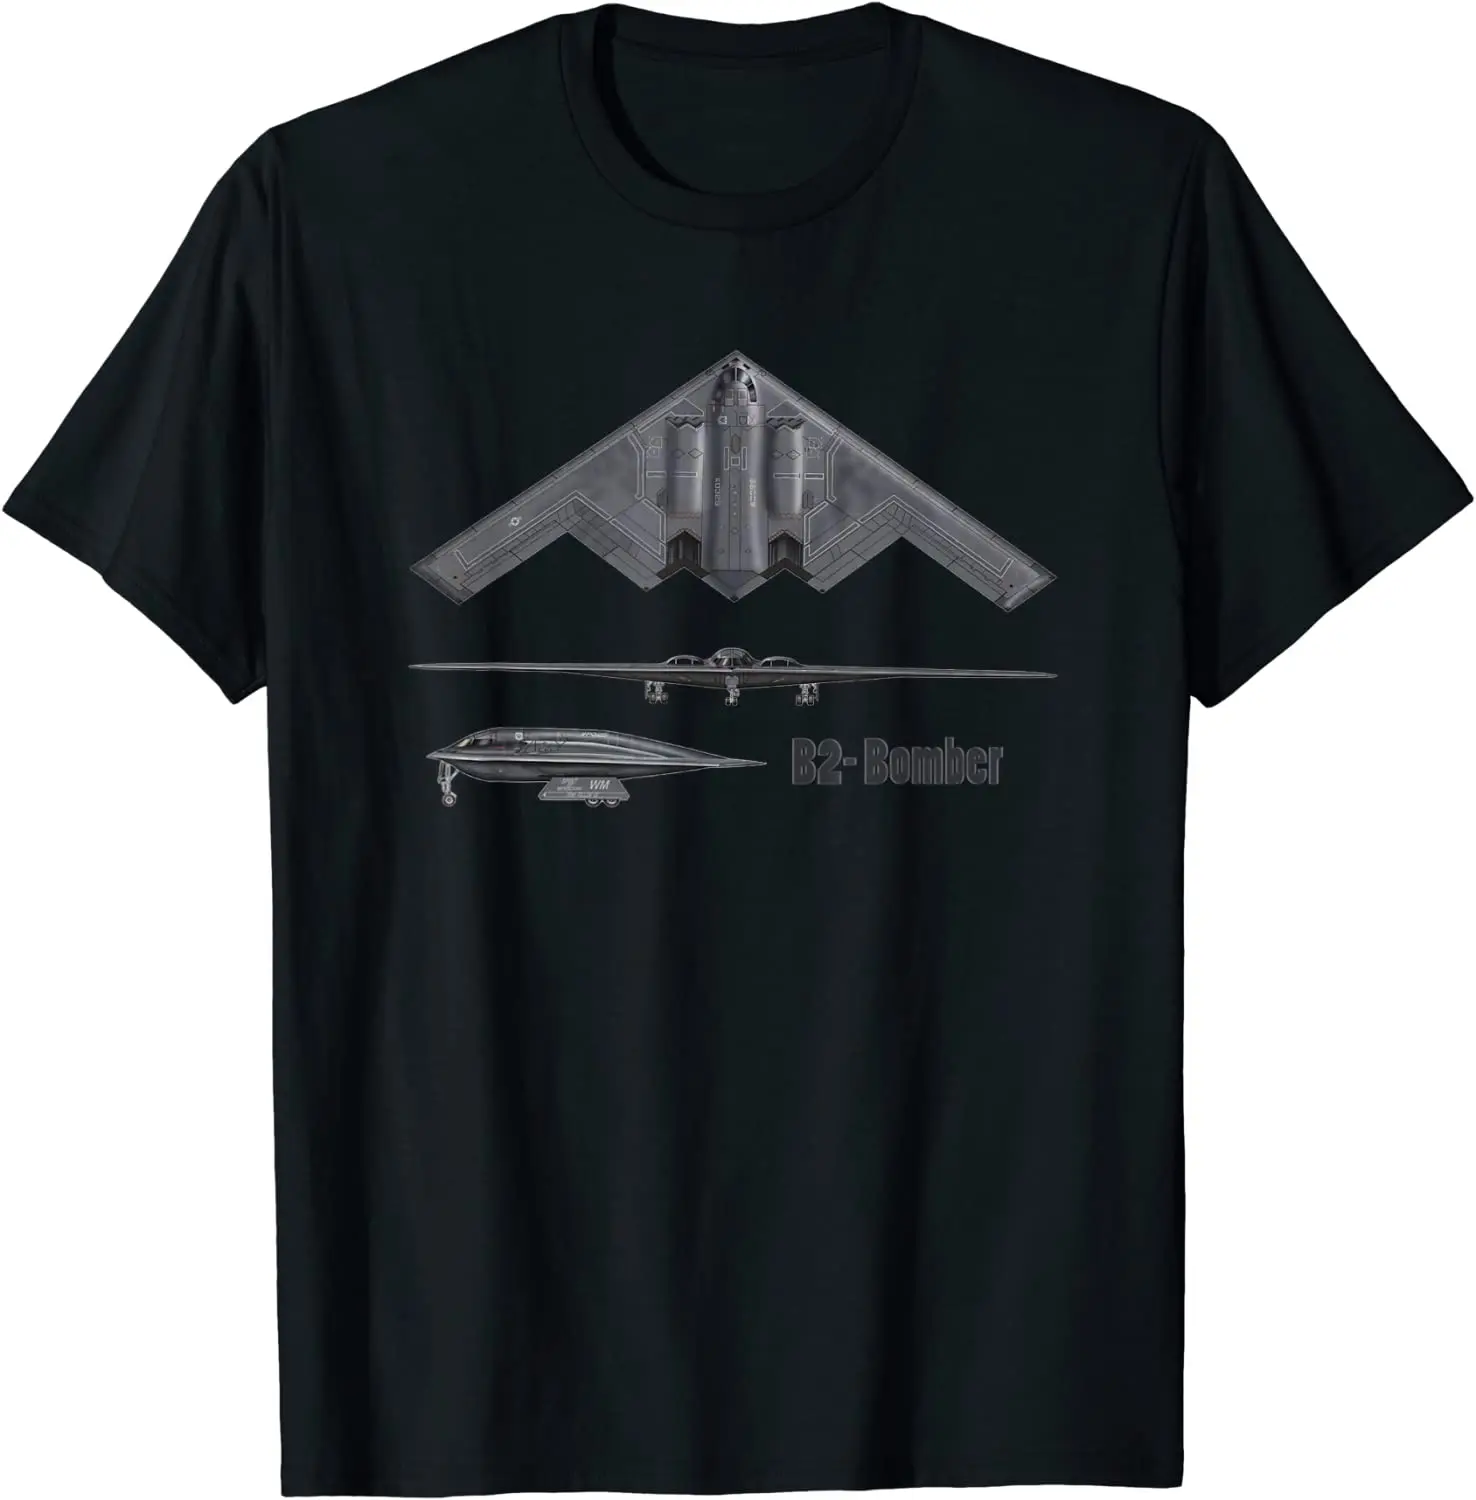 

B-2 Spirit Stealth Strategic Bomber T Shirt. New 100% Cotton Short Sleeve O-Neck Casual T-shirts Loose Top Size S-3XL